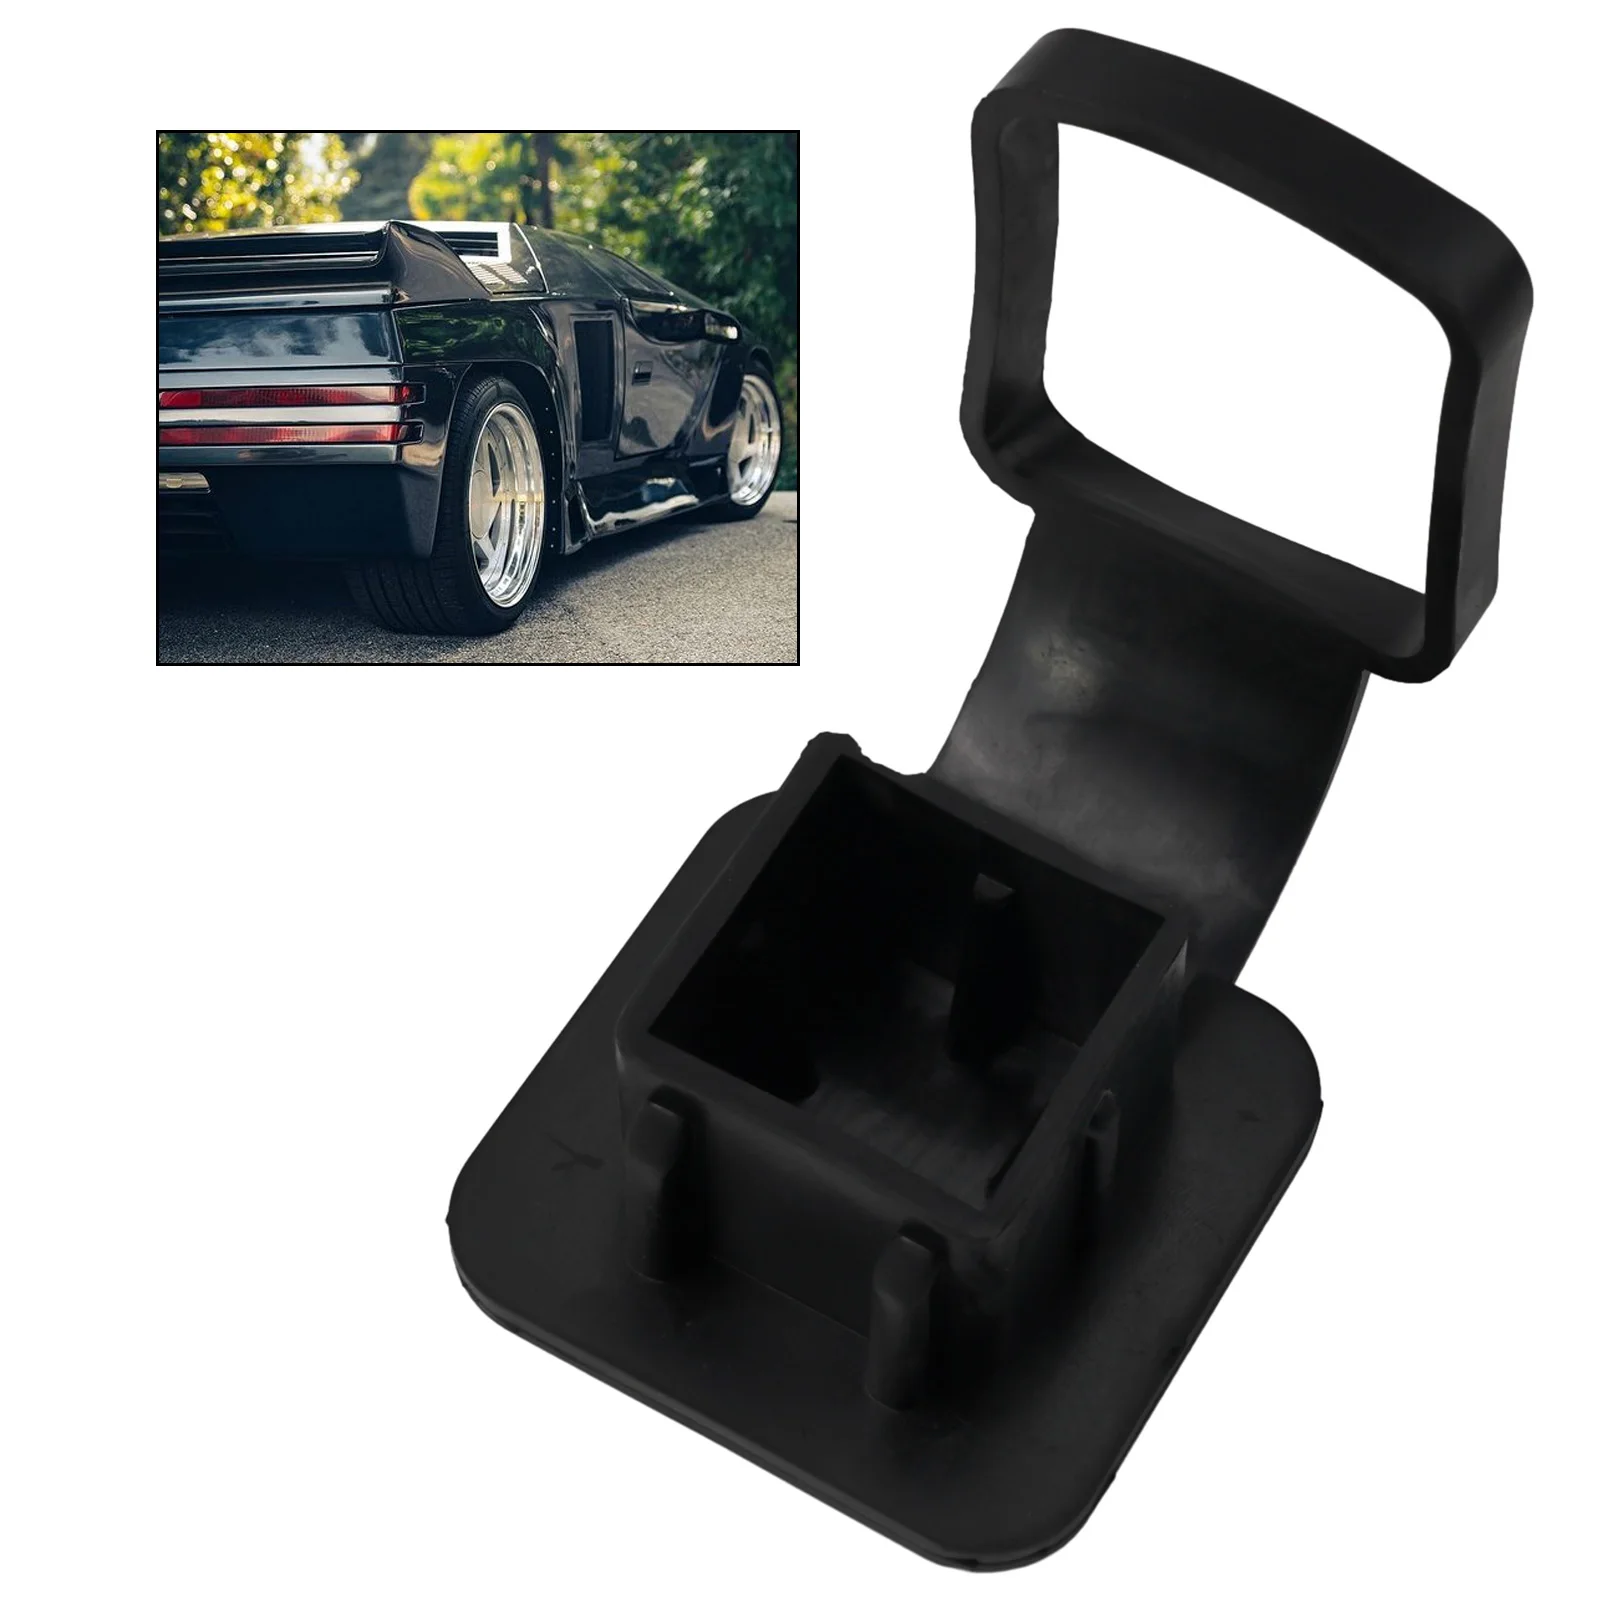 

1PCS Trailer Hitch Cover 2 Inch Rubber Hook Tube Cap Car Plug Cover Dustproof Protector For Towing Hitch Receivers Trailer Hook